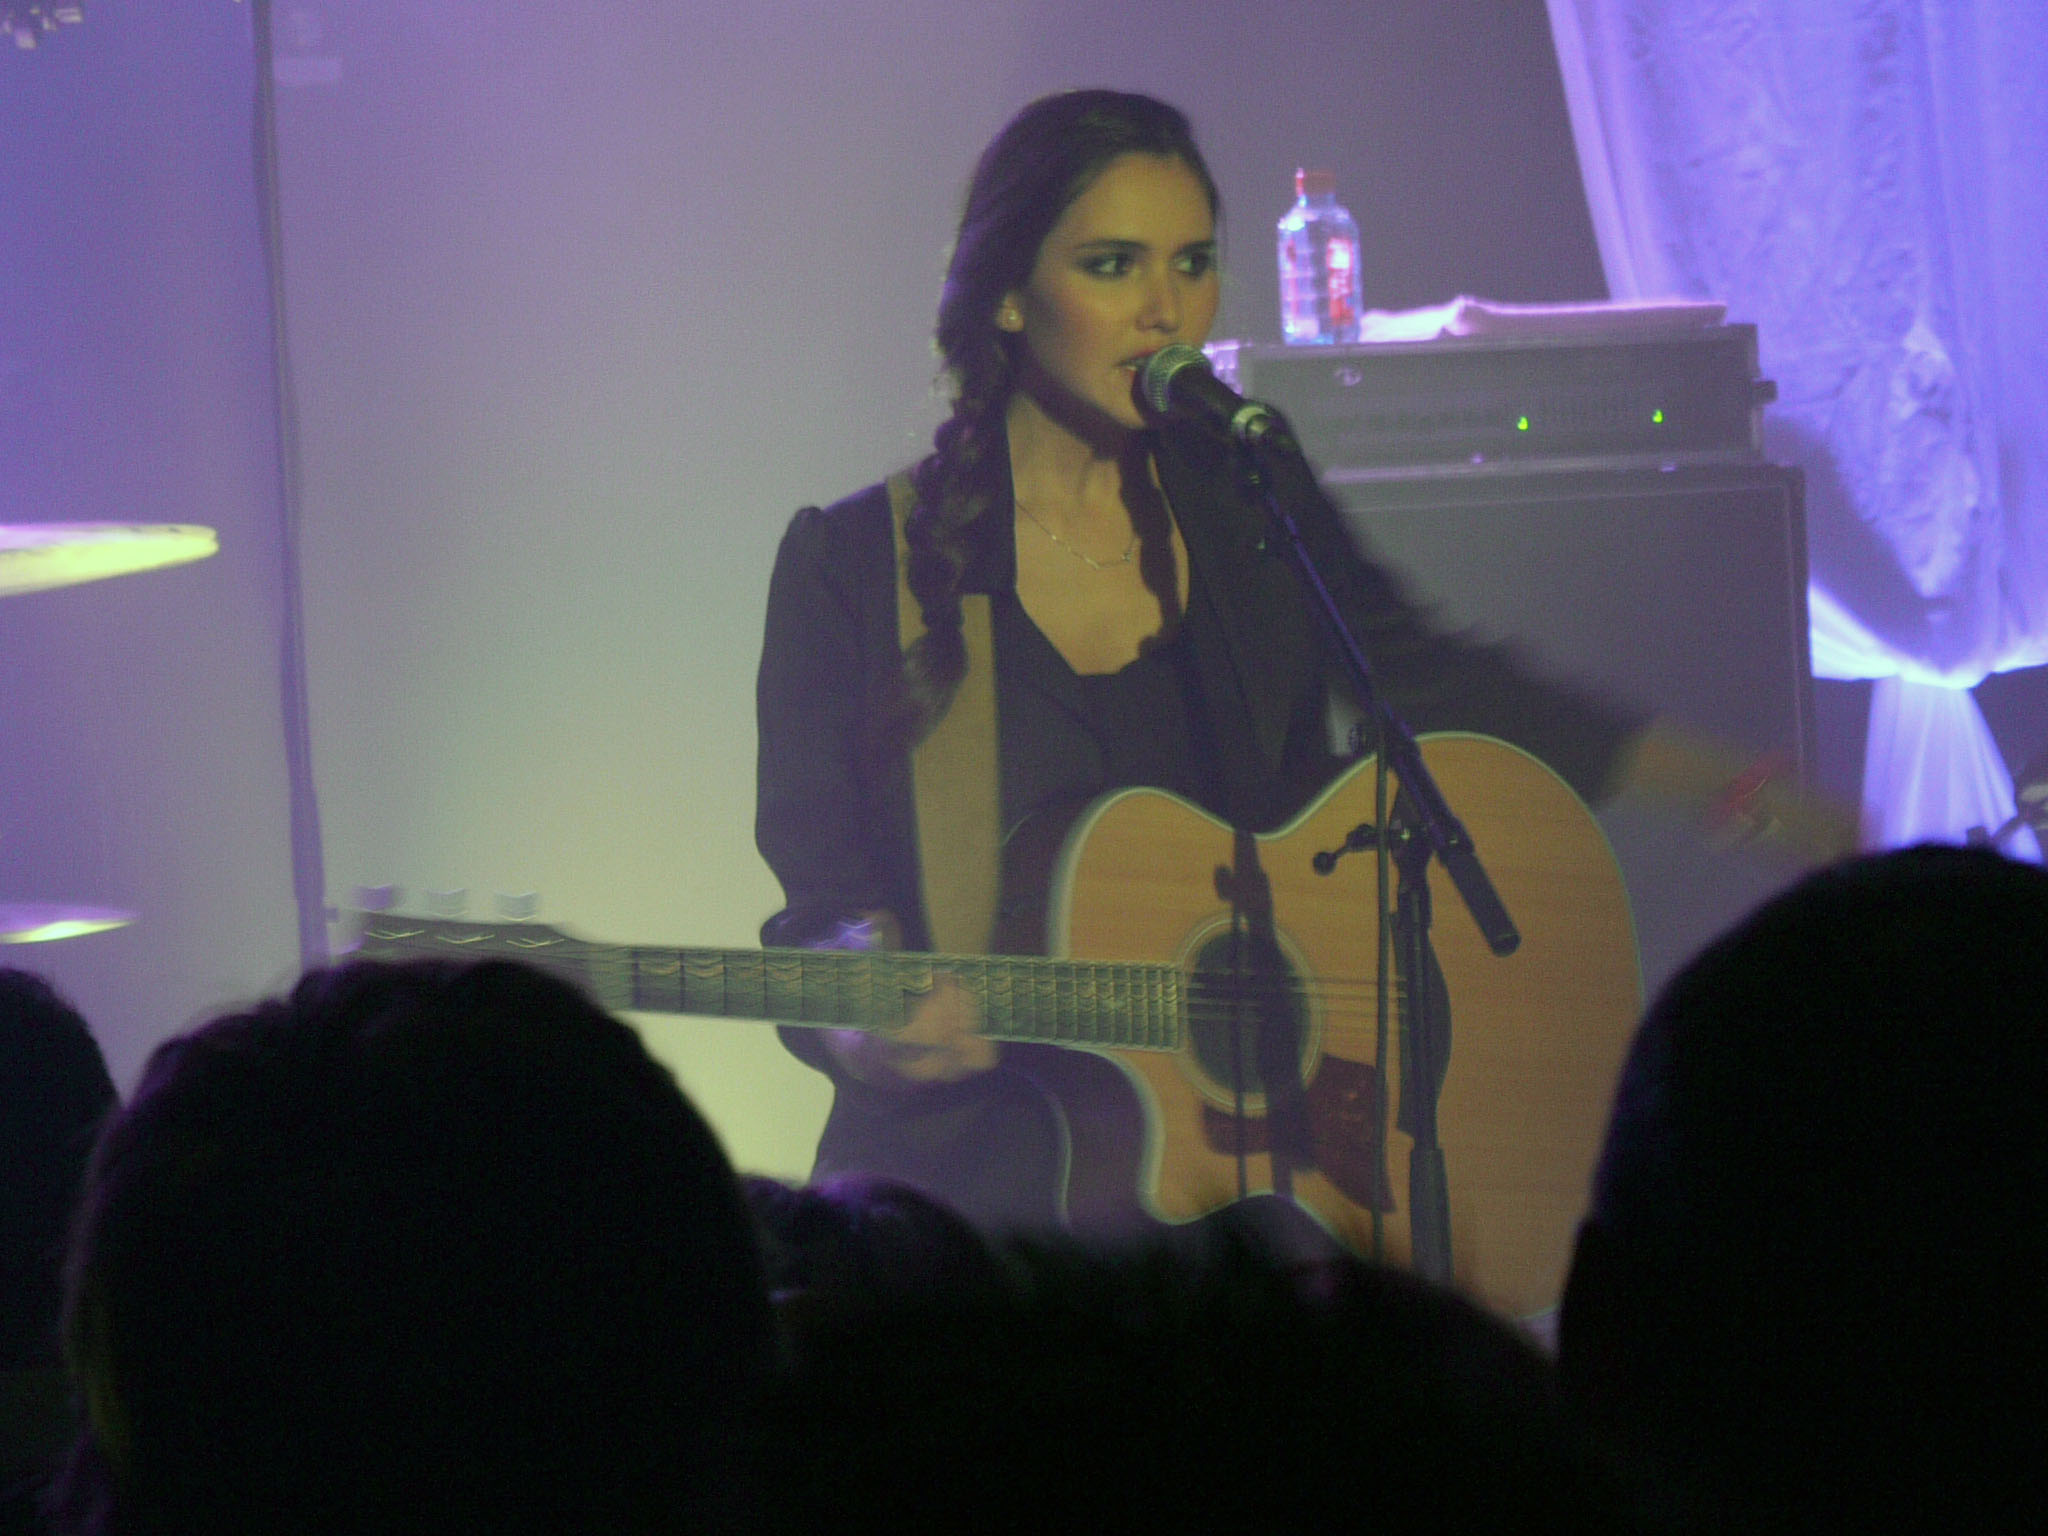 a woman holding a guitar singing in front of people